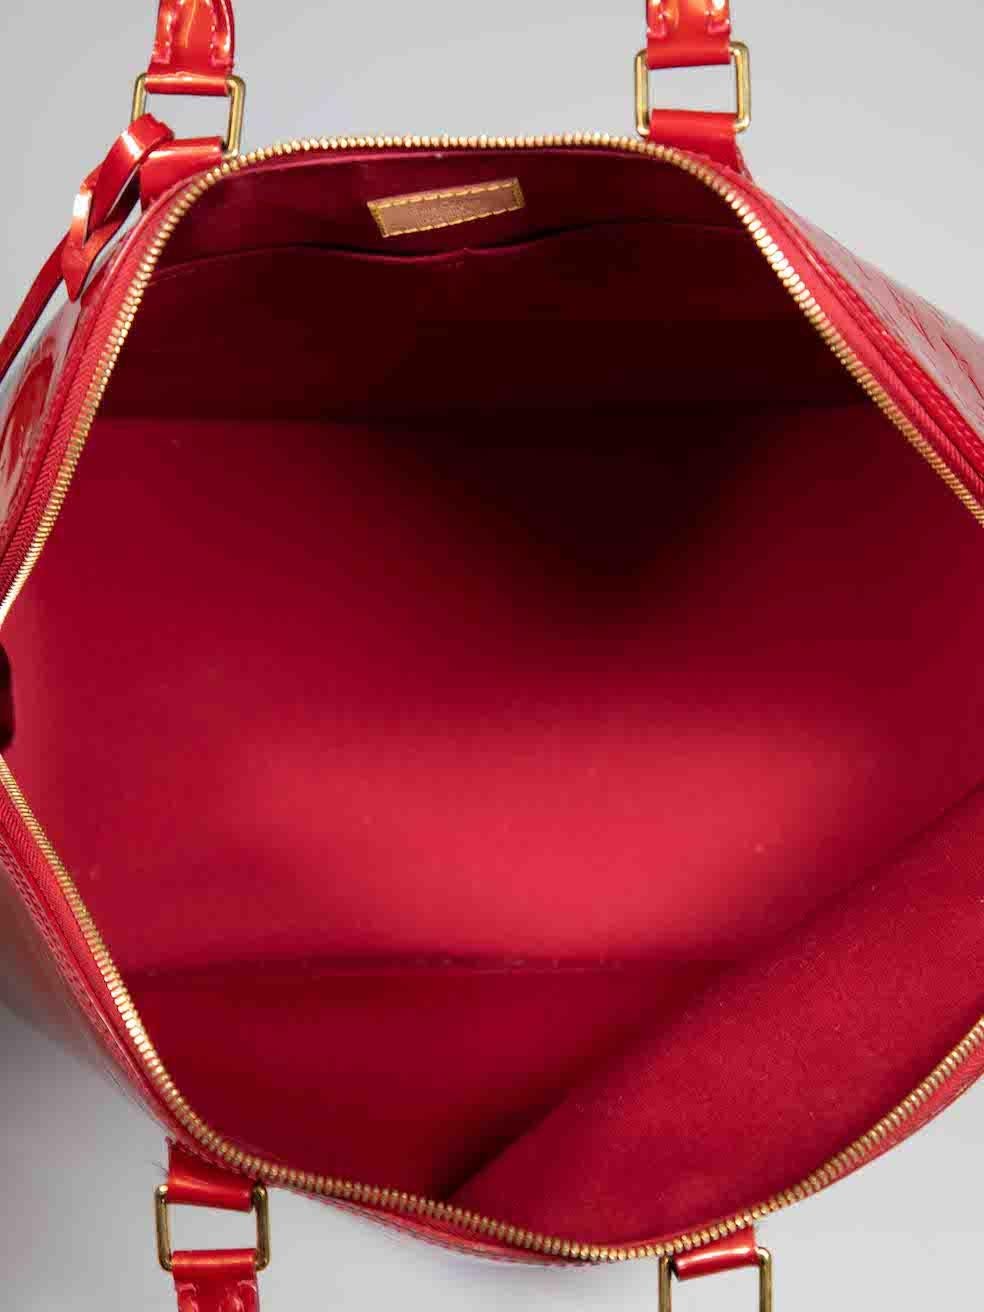 Louis Vuitton 2013 Red Patent Leather Vernis Alma GM 1